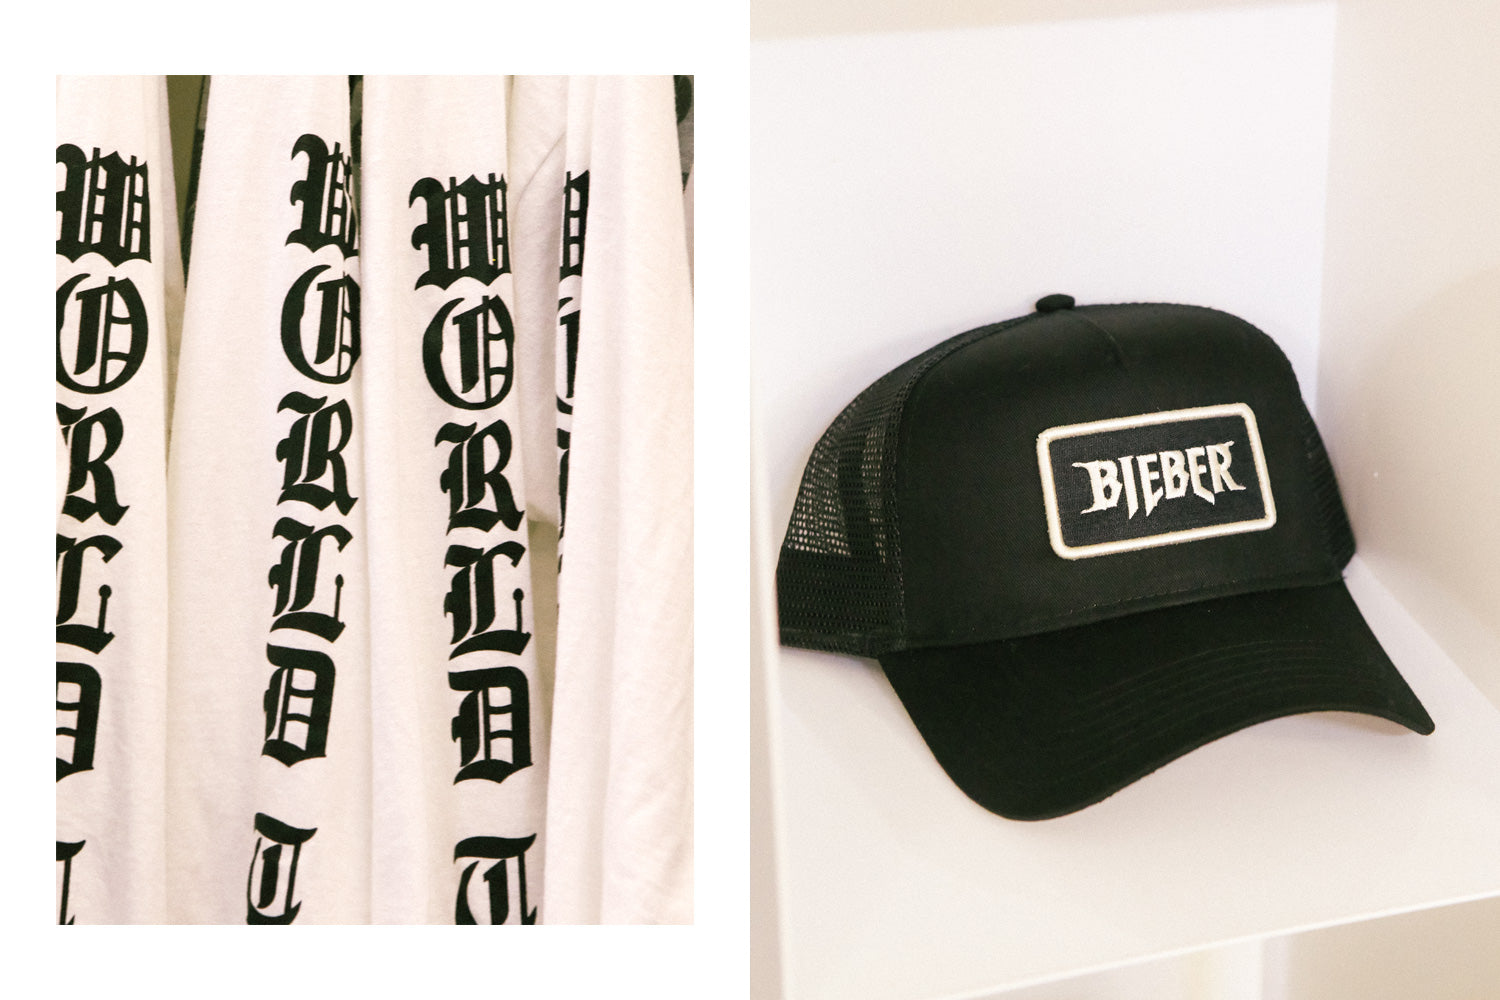 IN CASE YOU MISSED IT, HERE'S A RECAP OF THE VFILES x JUSTIN BIEBER POP-UP.